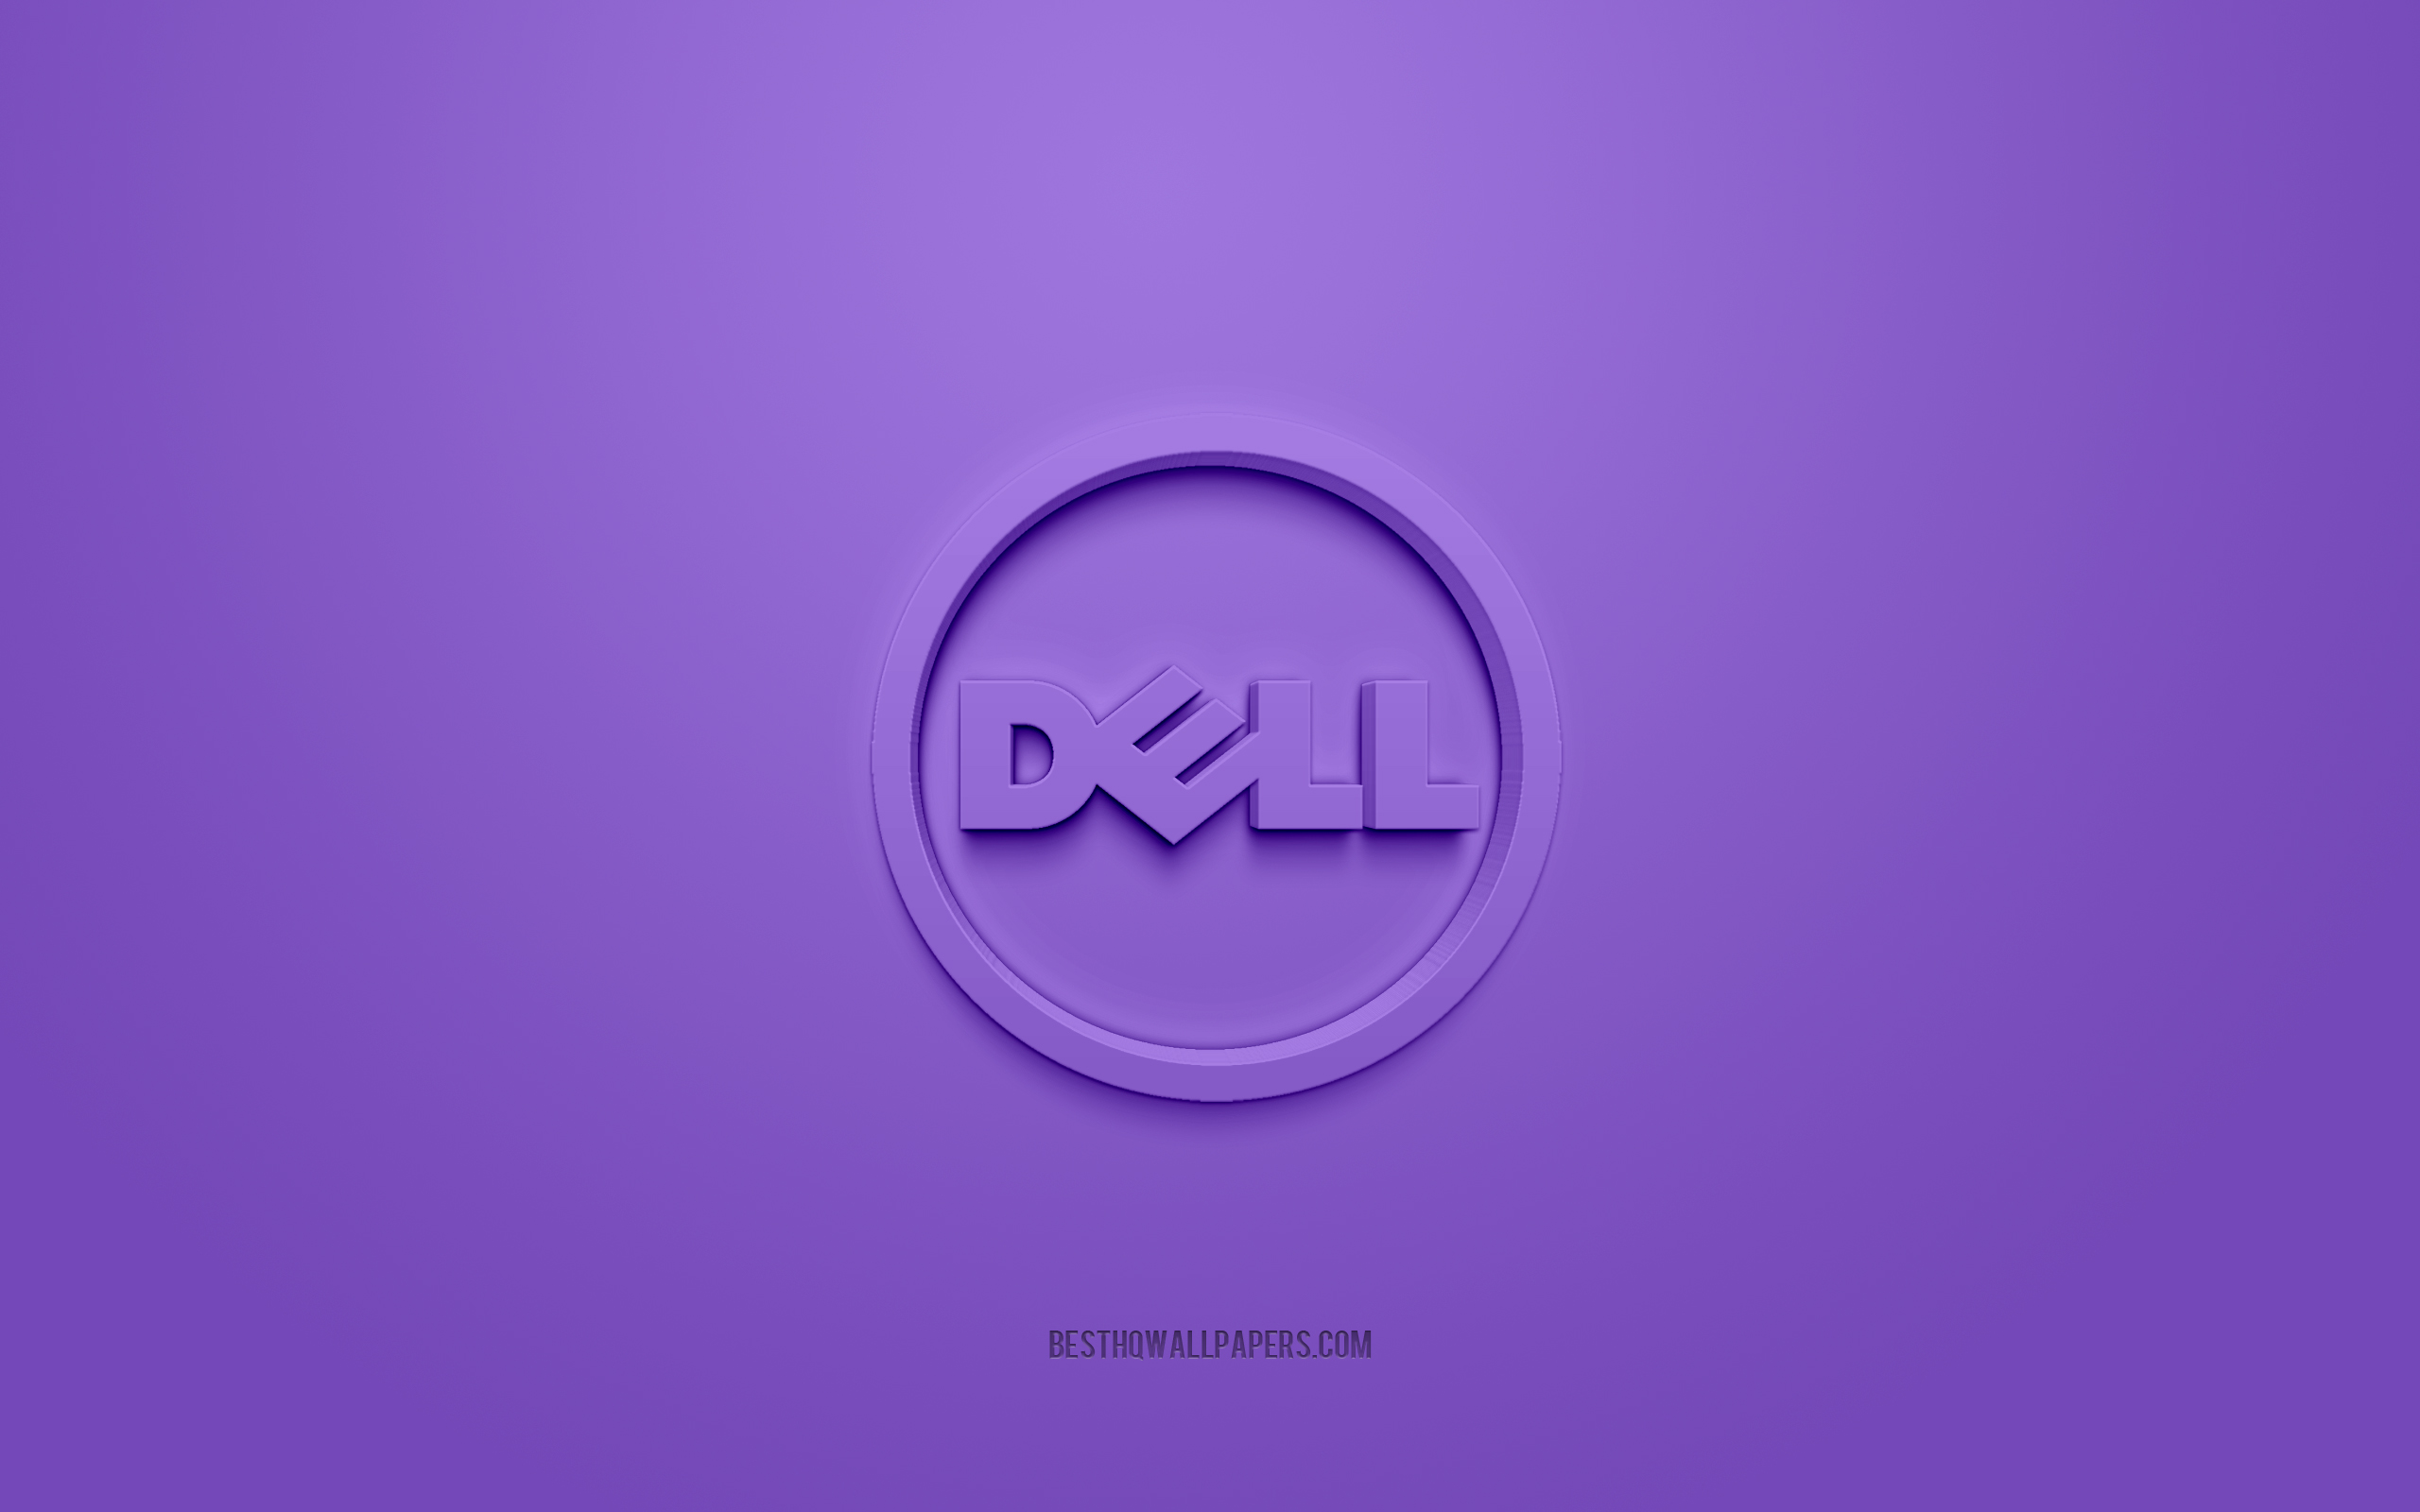 Download wallpaper Dell round logo, purple background, Dell 3D logo, 3D art, Dell, brands logo, Dell logo, purple 3D Dell logo for desktop with resolution 2560x1600. High Quality HD picture wallpaper